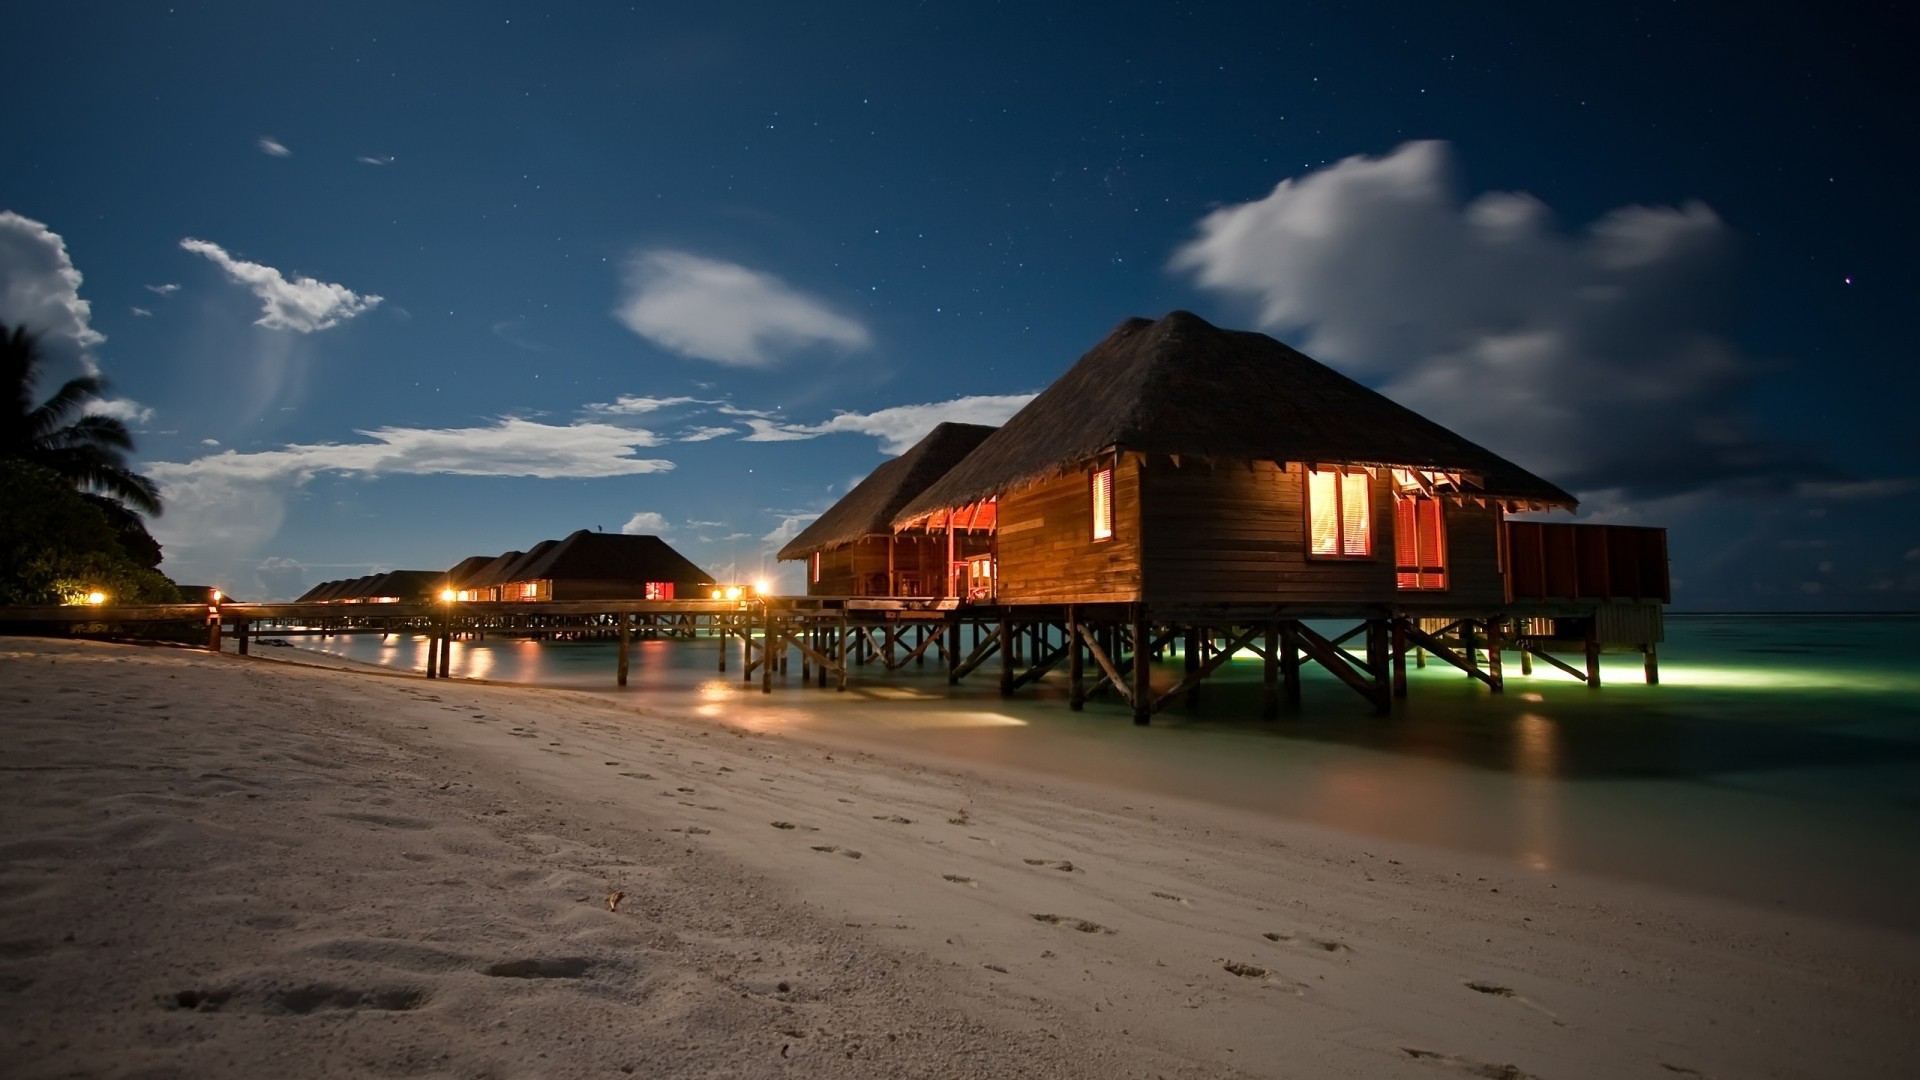 1920x1080 Beach Houses At Night Desktop Pc And Mac Wallpaper Pictures